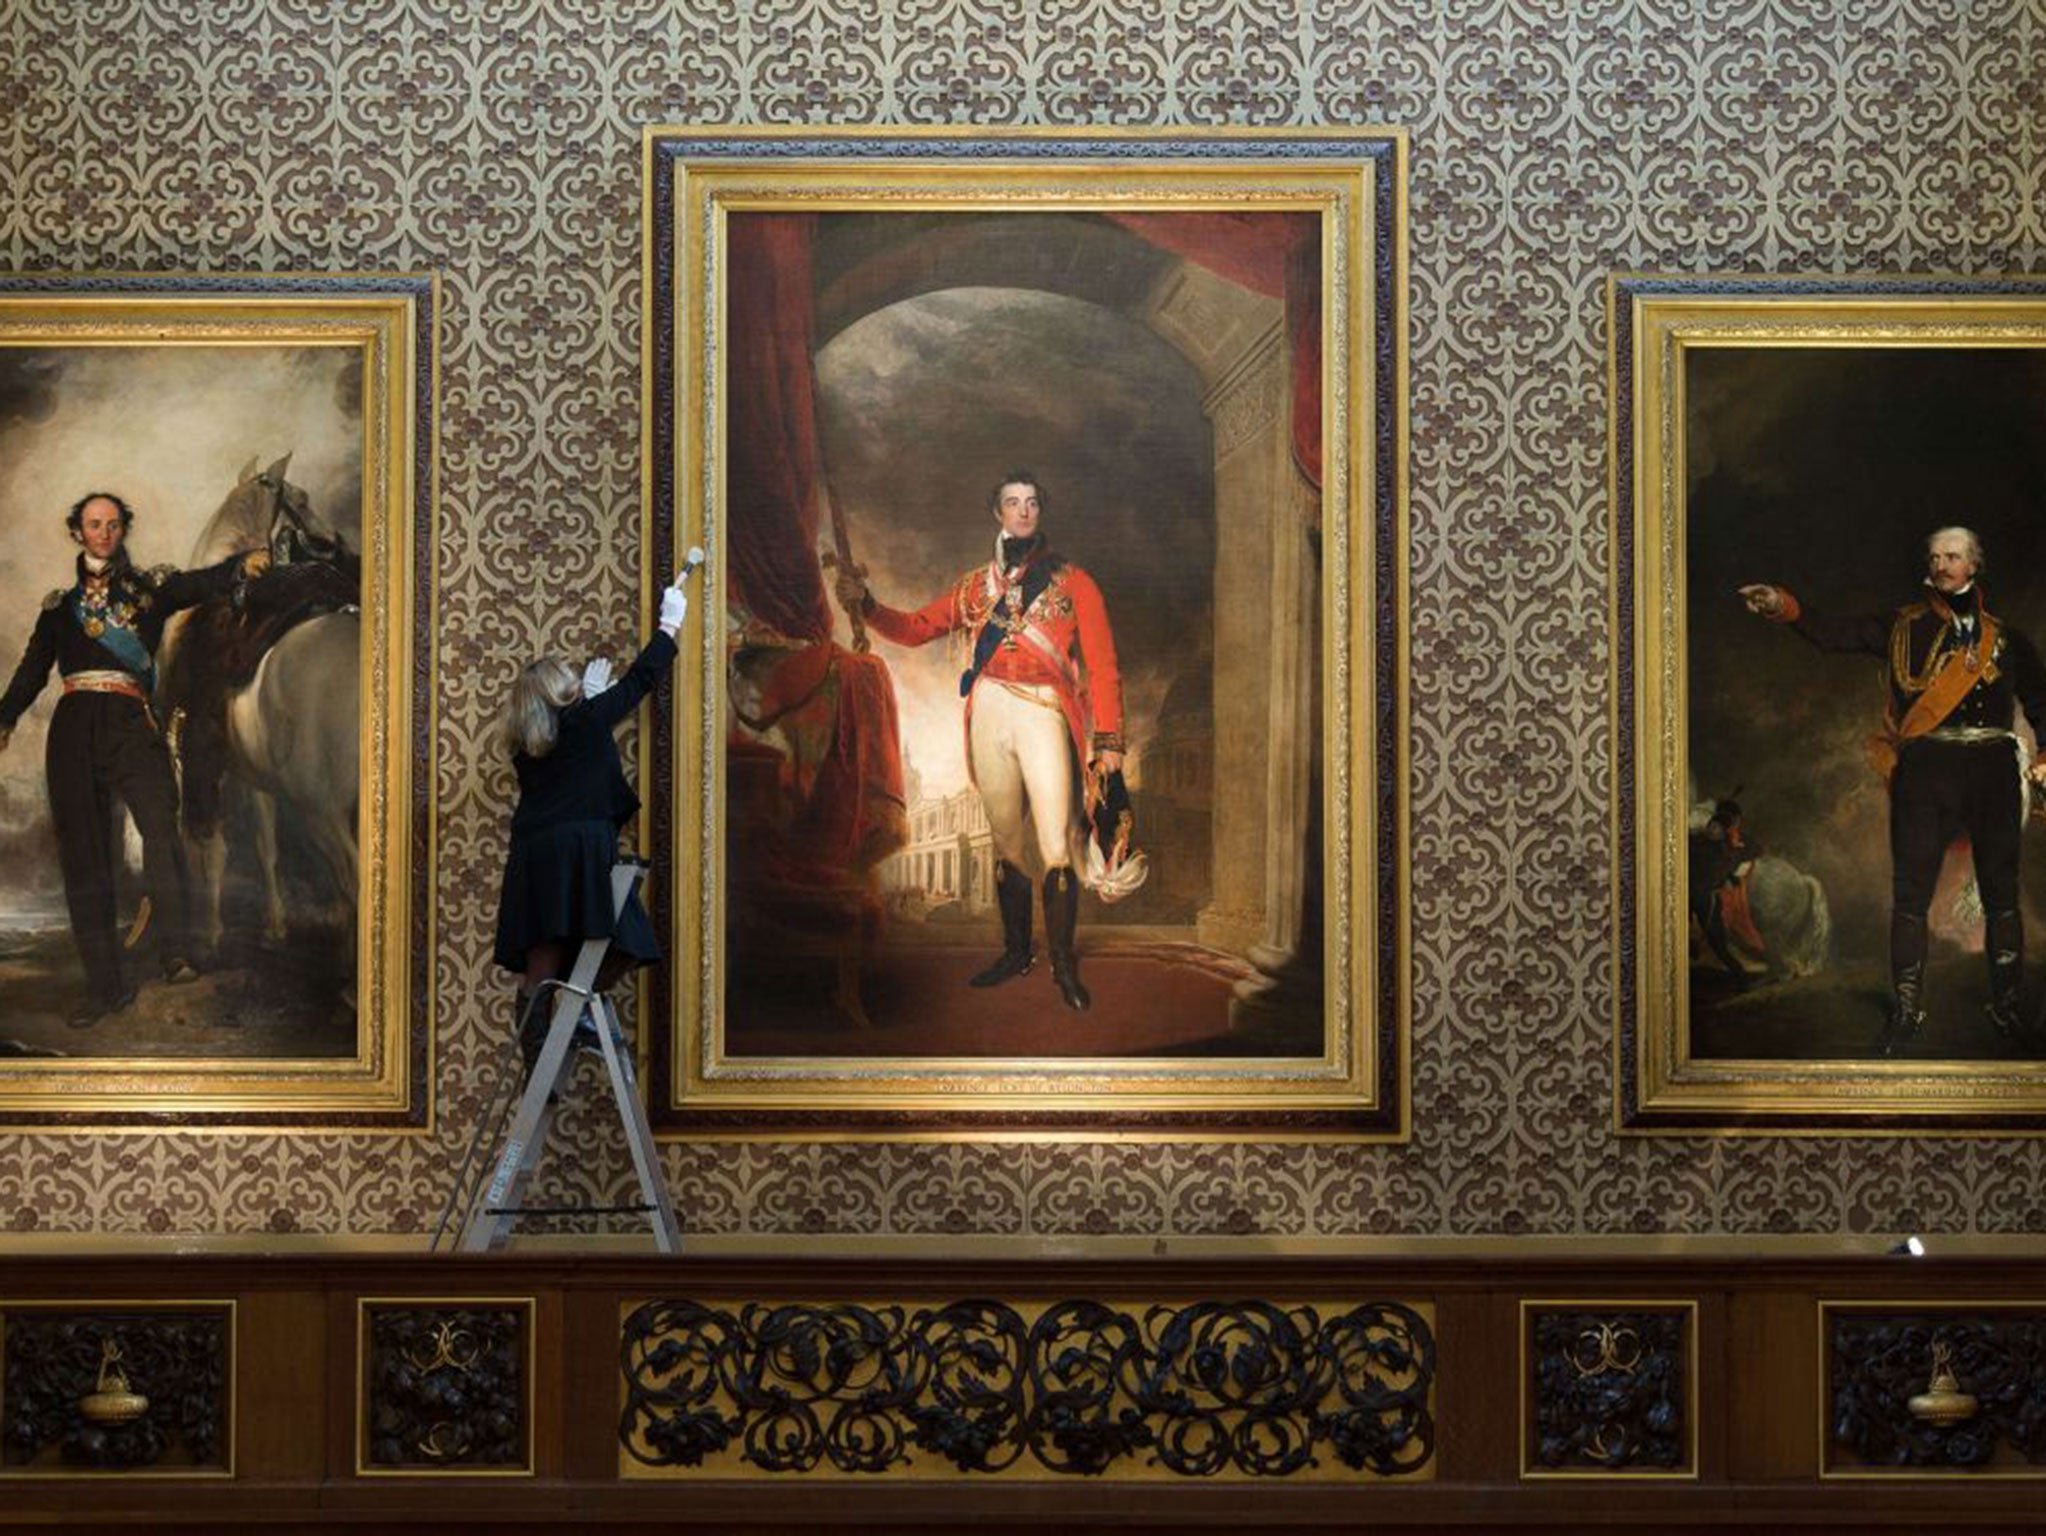 A woman dusts the frame of a painting of Arthur Wellesley, Duke of Wellington by Thomas Lawrence